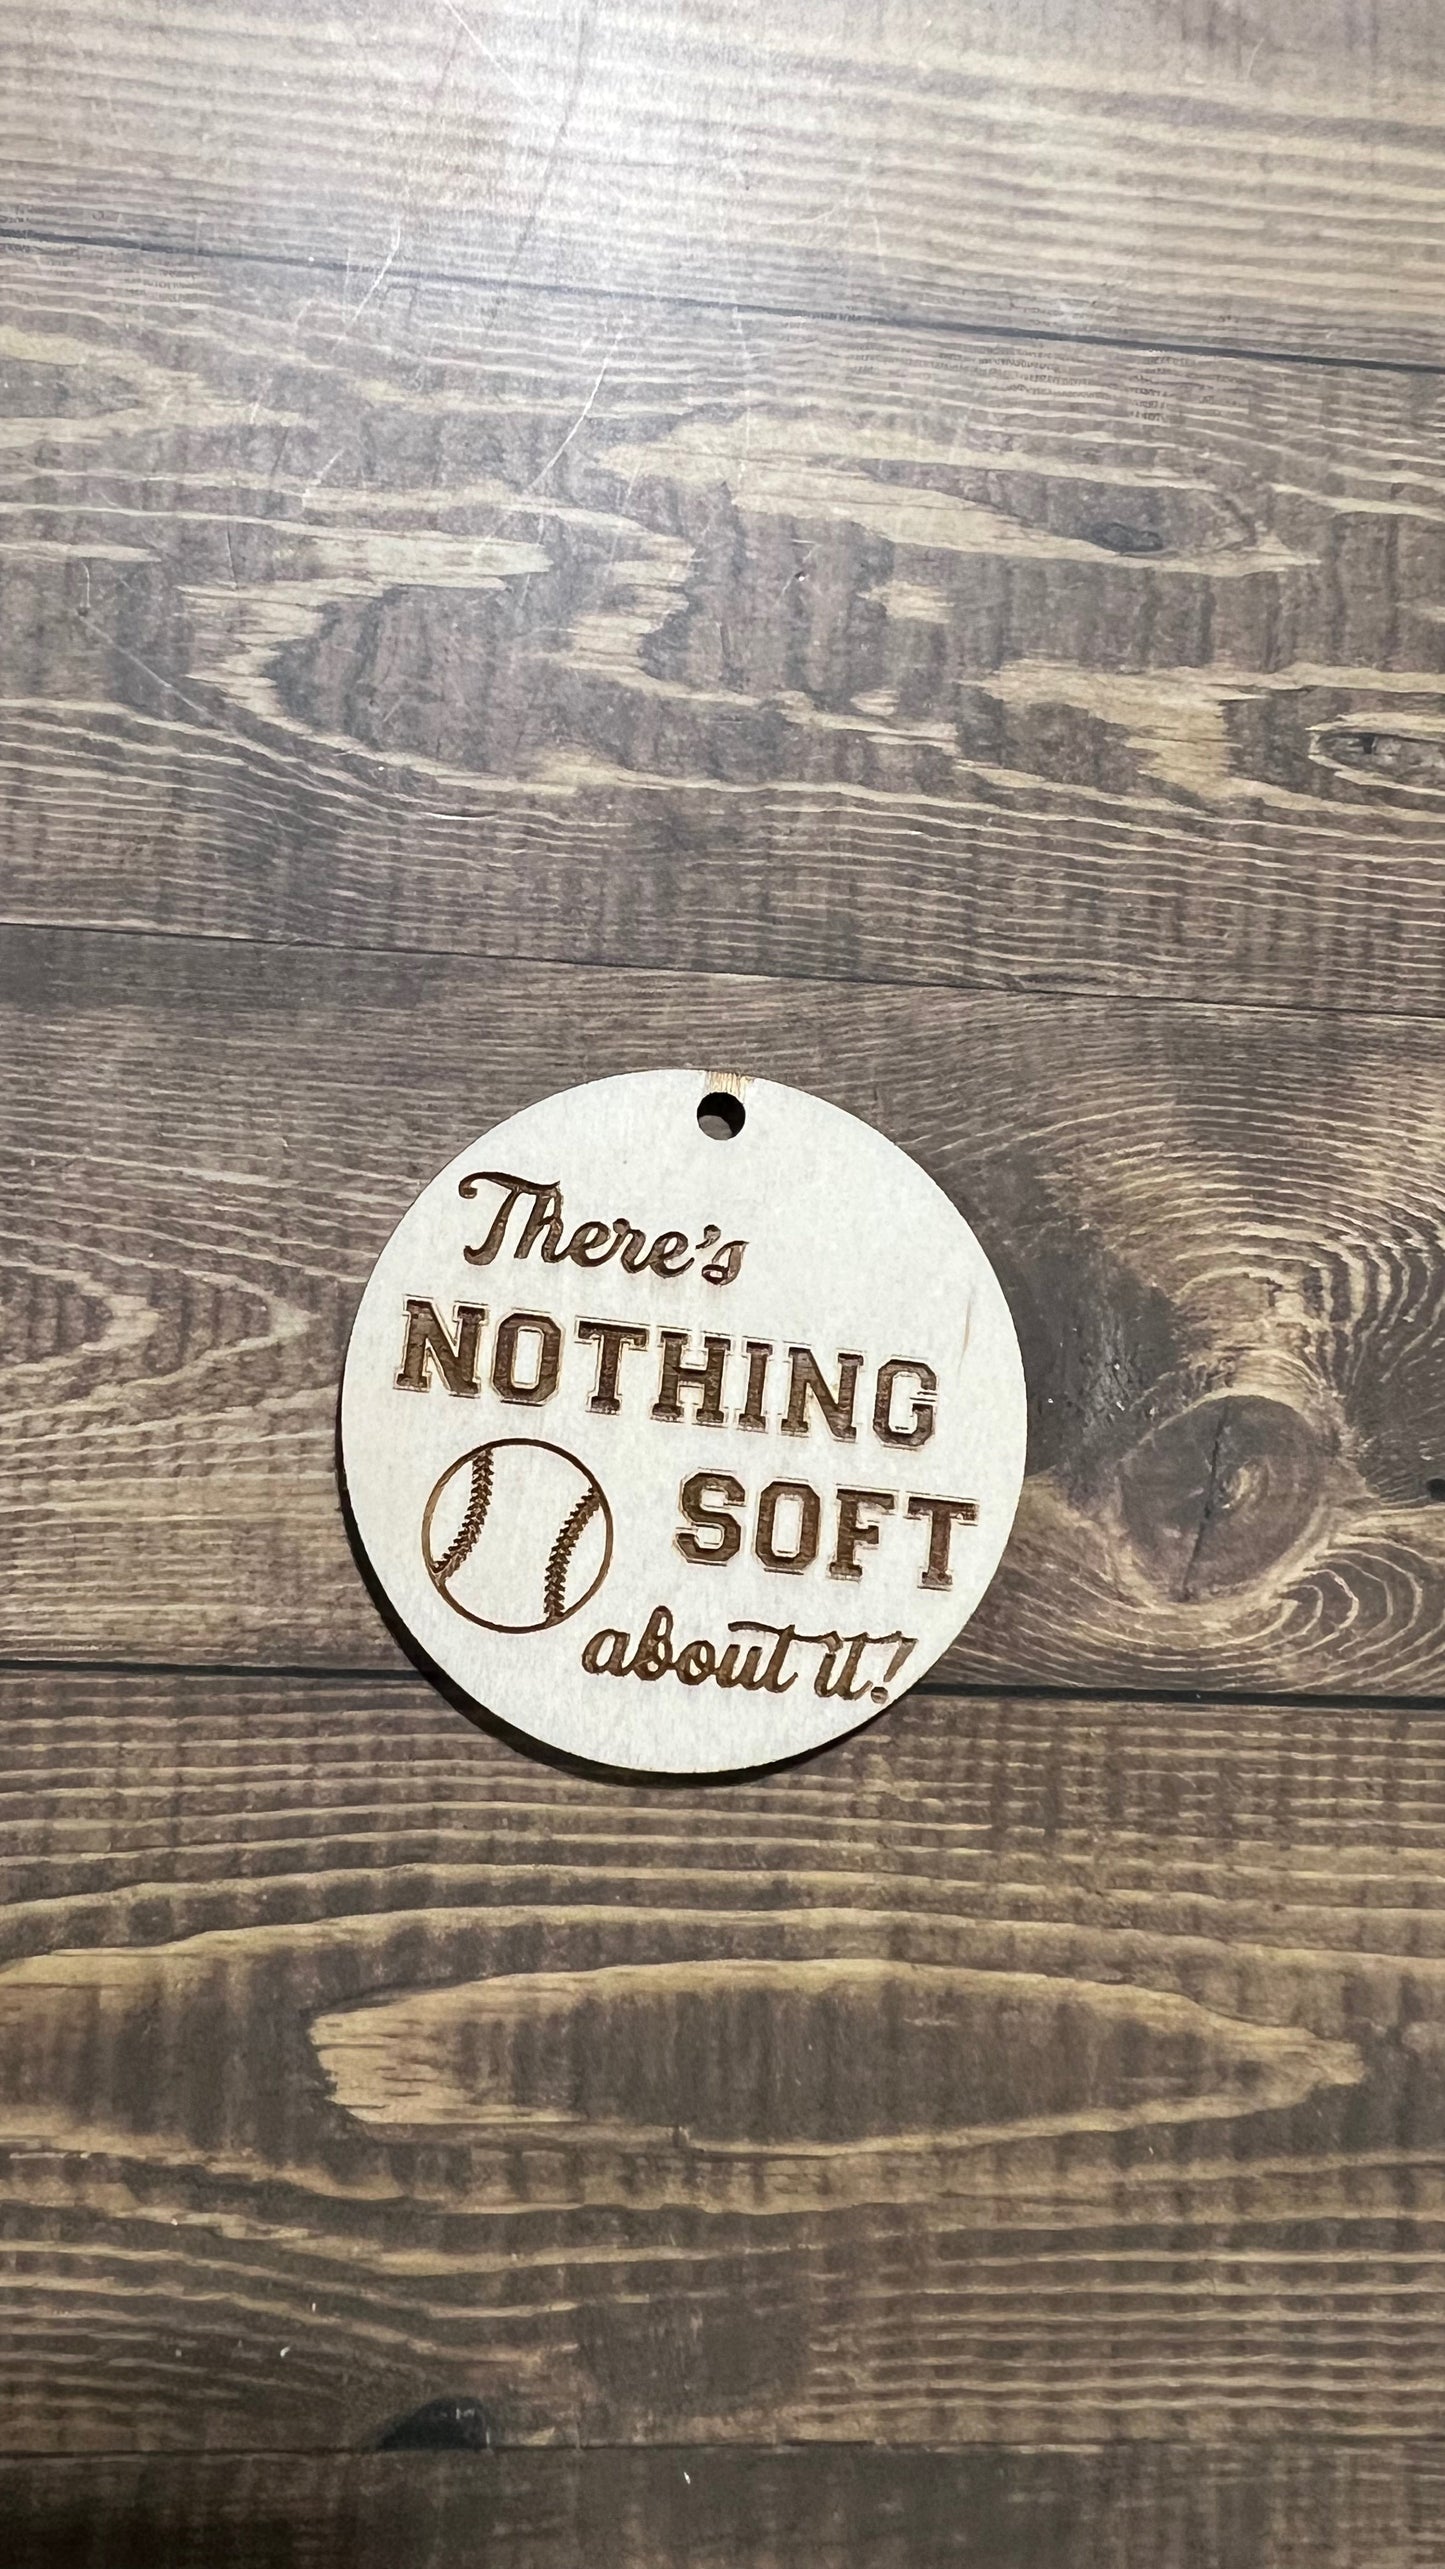 There's Nothing Soft About it Keychain,  Baseball Keychains